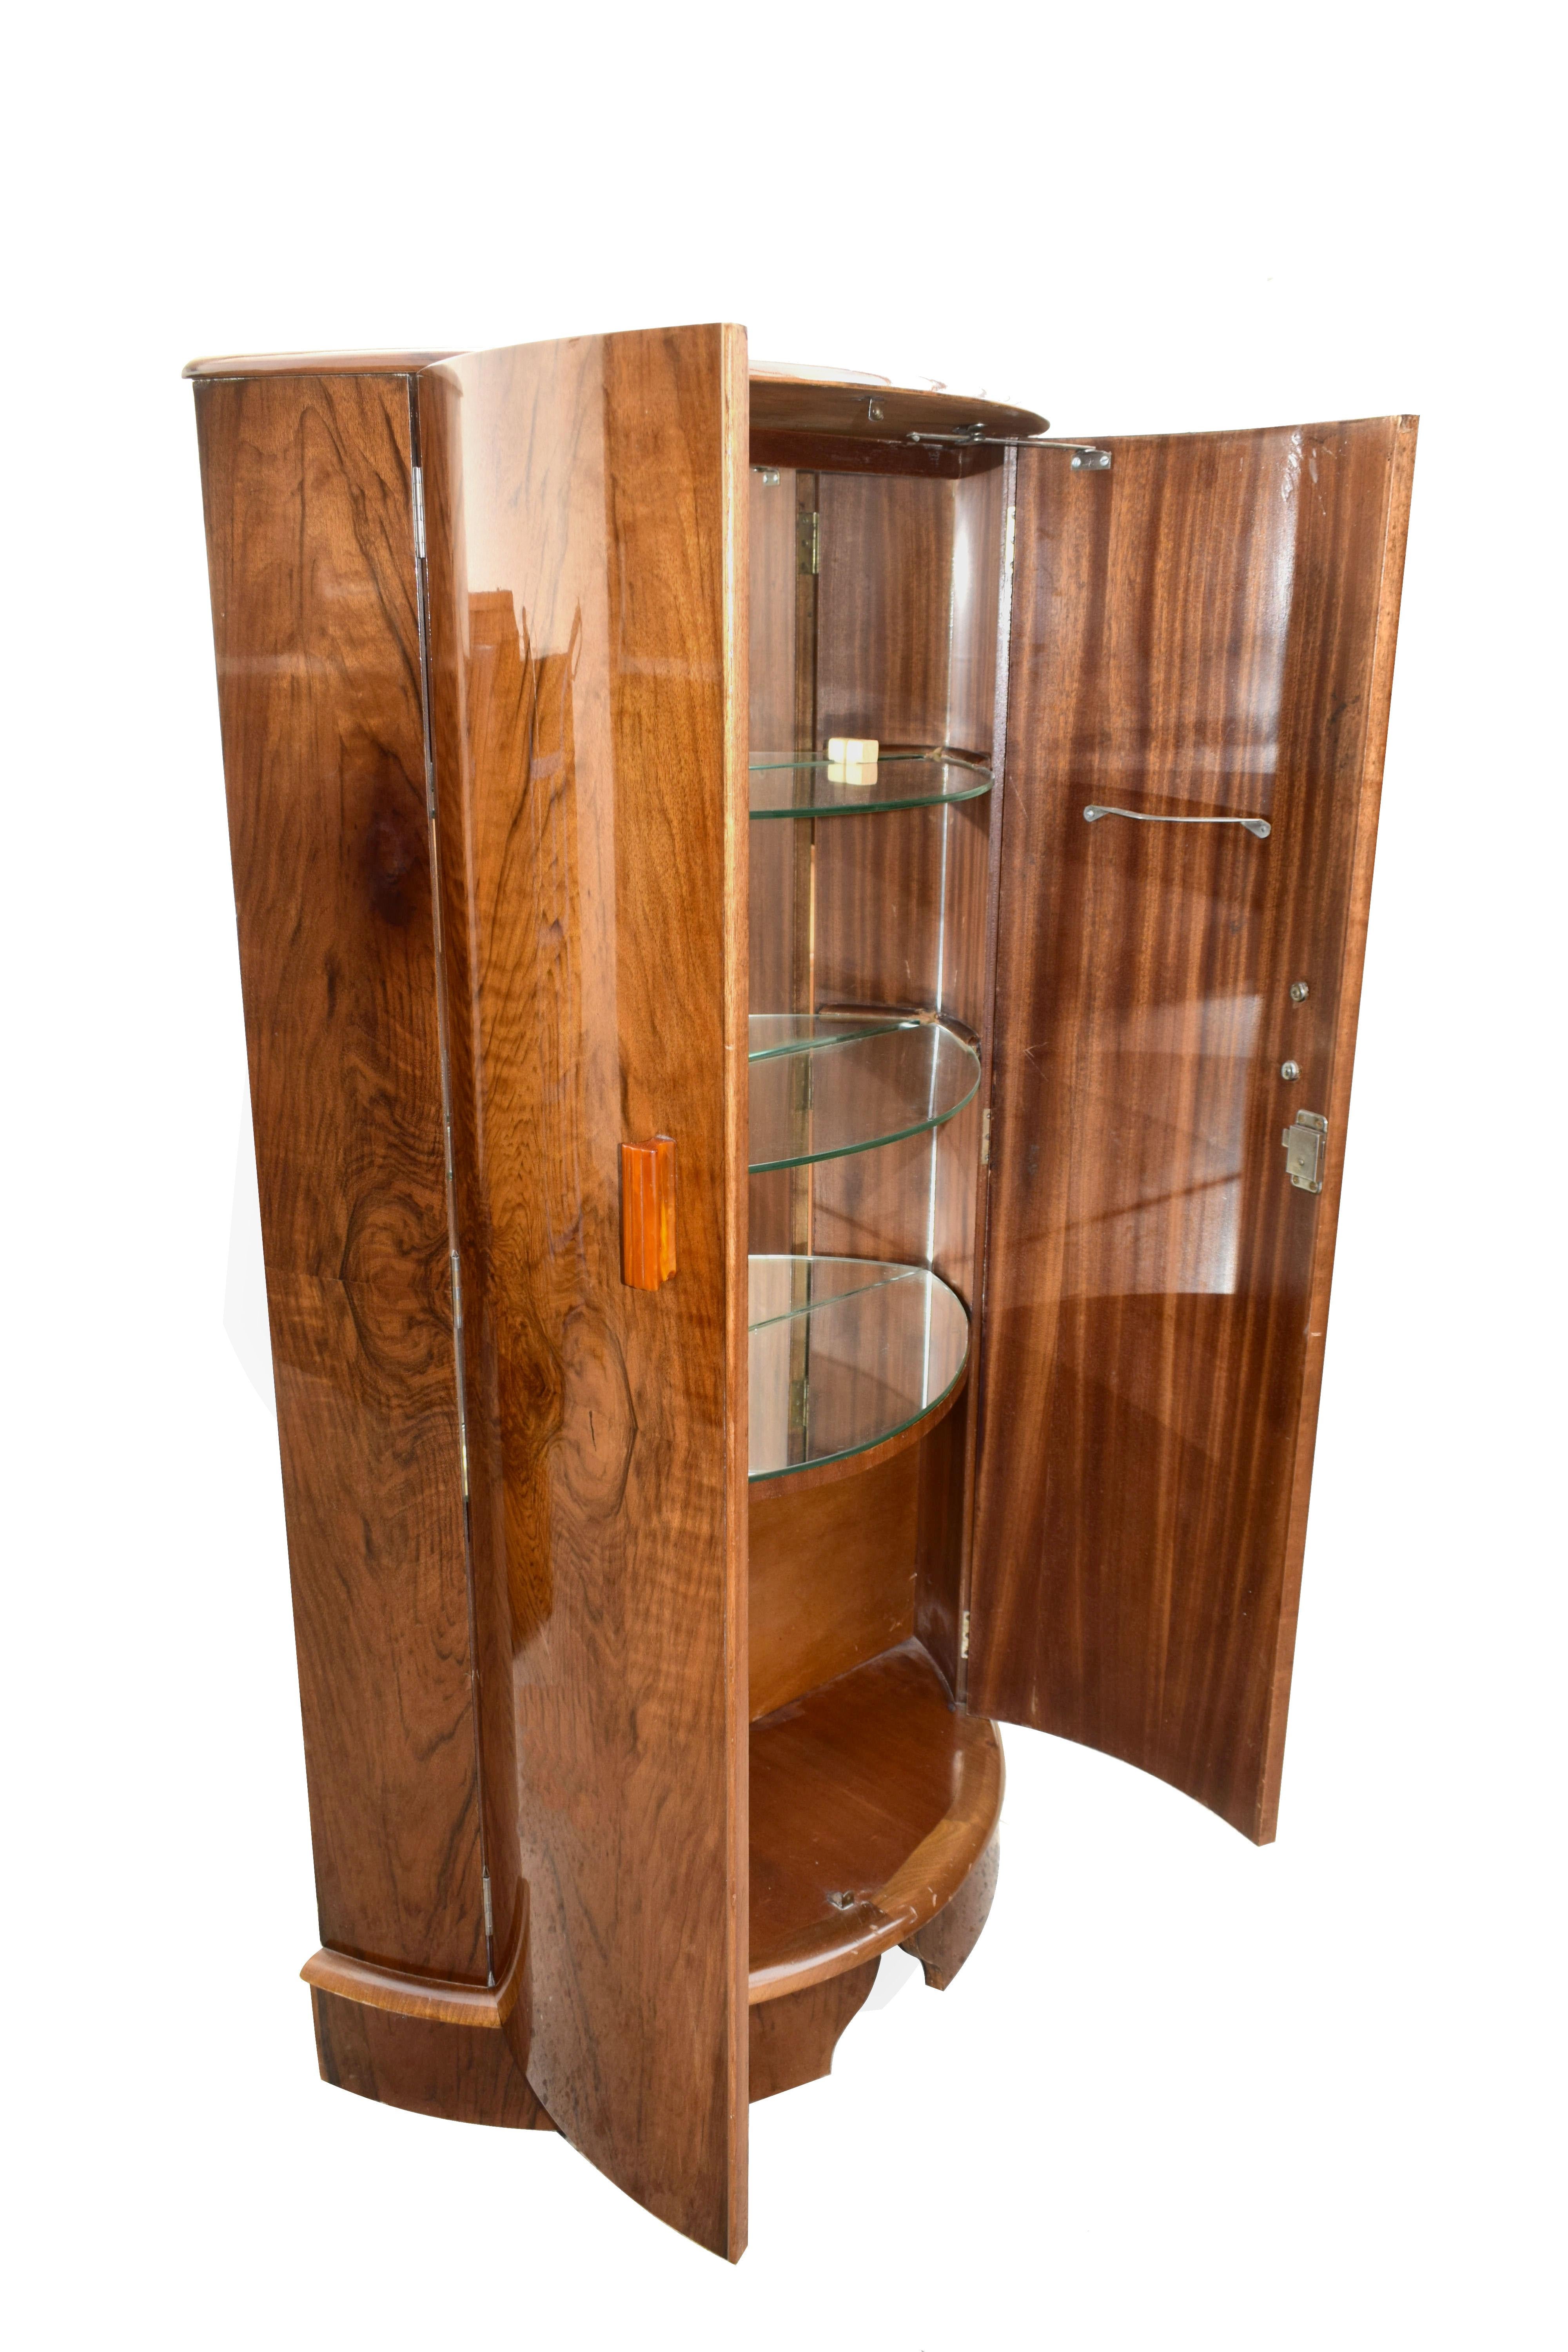 For your consideration are this beautifully styled Art Deco cocktail cabinet, dating to the 1930s and English. A perfect piece if you want lots of storage but not a lot of space taken up and with added wow factor. The whole piece is literally a